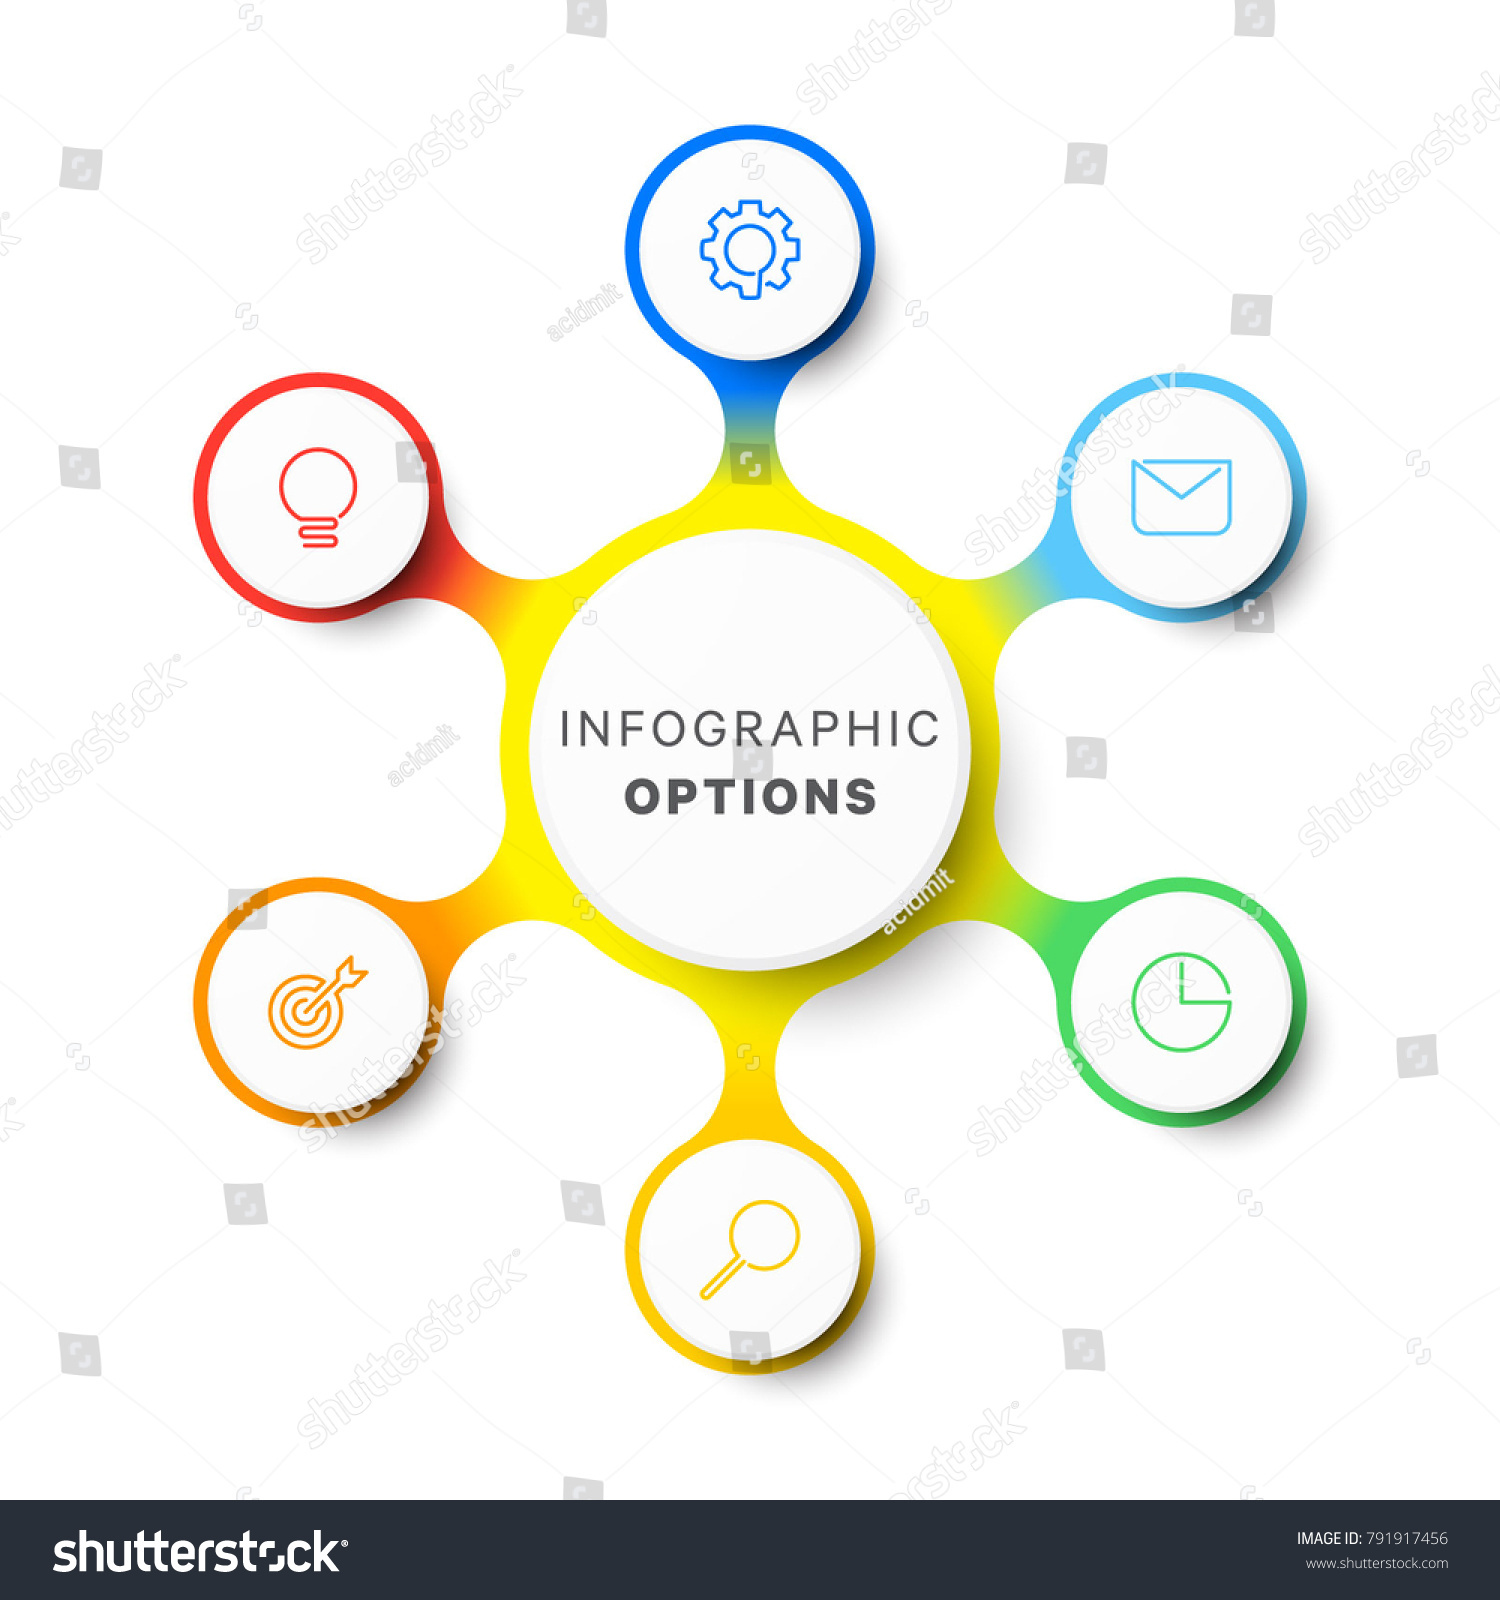 Simple Six Options Design Layout Infographic Stock Vector (Royalty Free ...